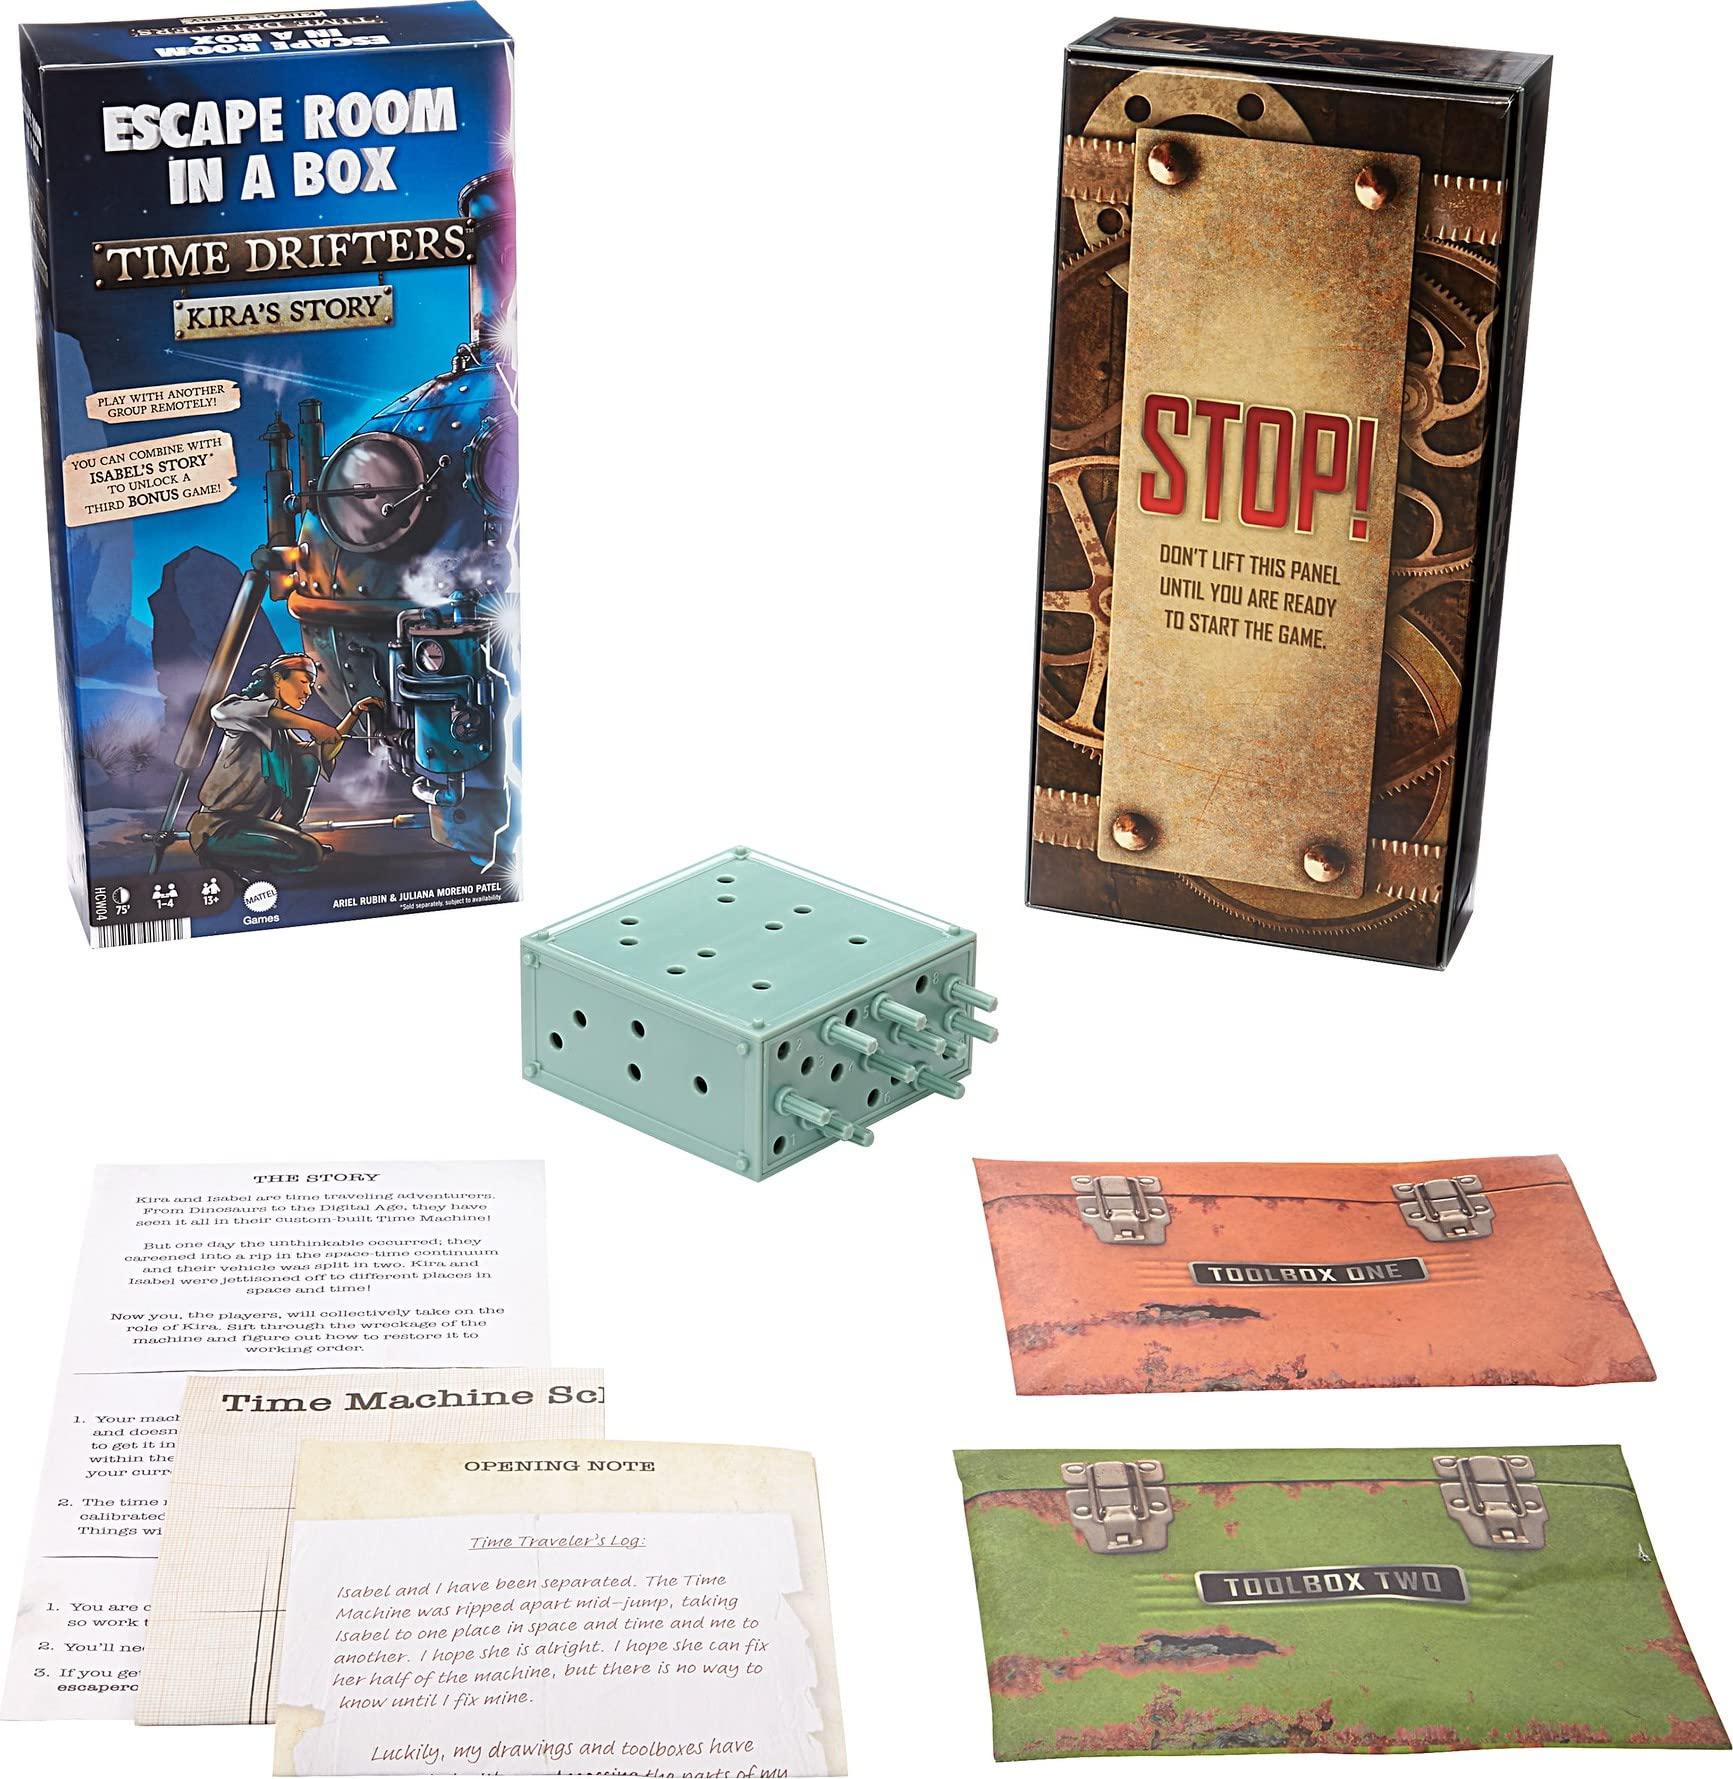 Mattel escape room in a box: time drifters kira's story party game for 1 to 4 players with clues & puzzles, combine with kira's stor